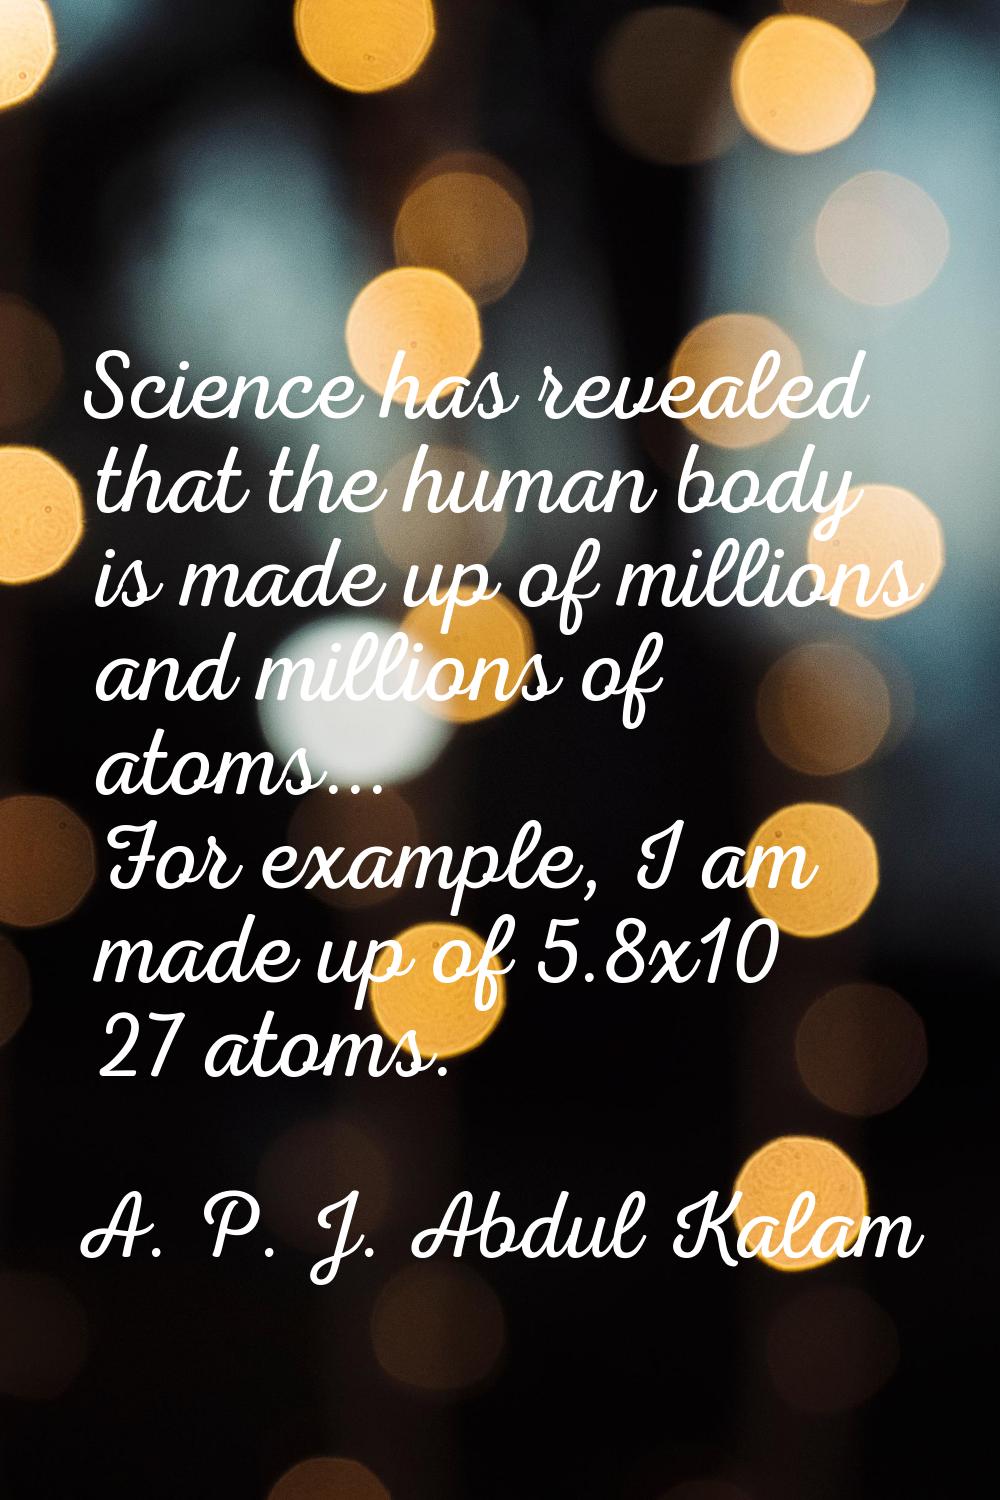 Science has revealed that the human body is made up of millions and millions of atoms... For exampl